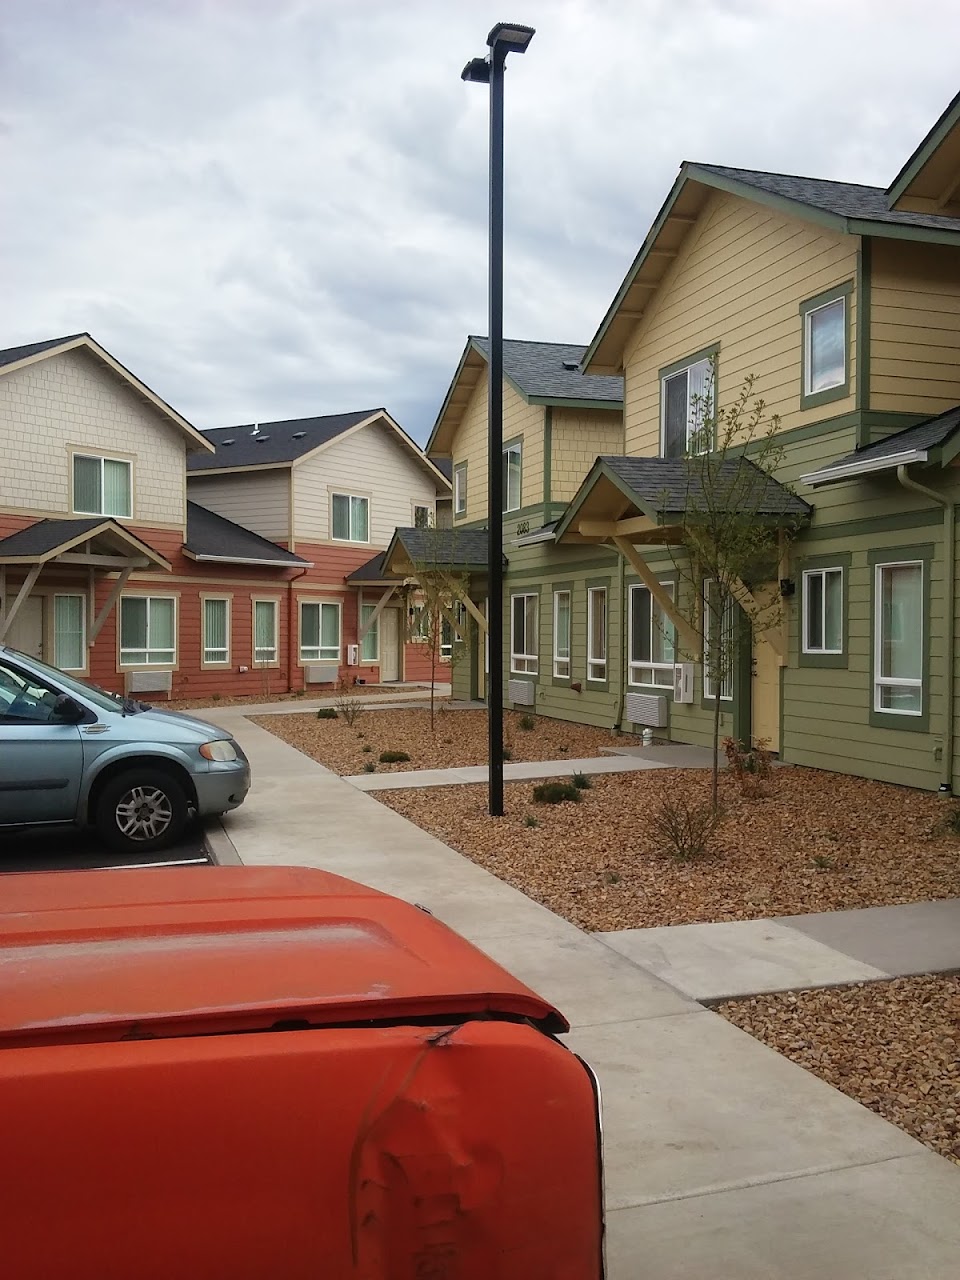 Photo of DAGGETT TOWNHOMES. Affordable housing located at 2027 NE DAGGETT LANE BEND, OR 97701